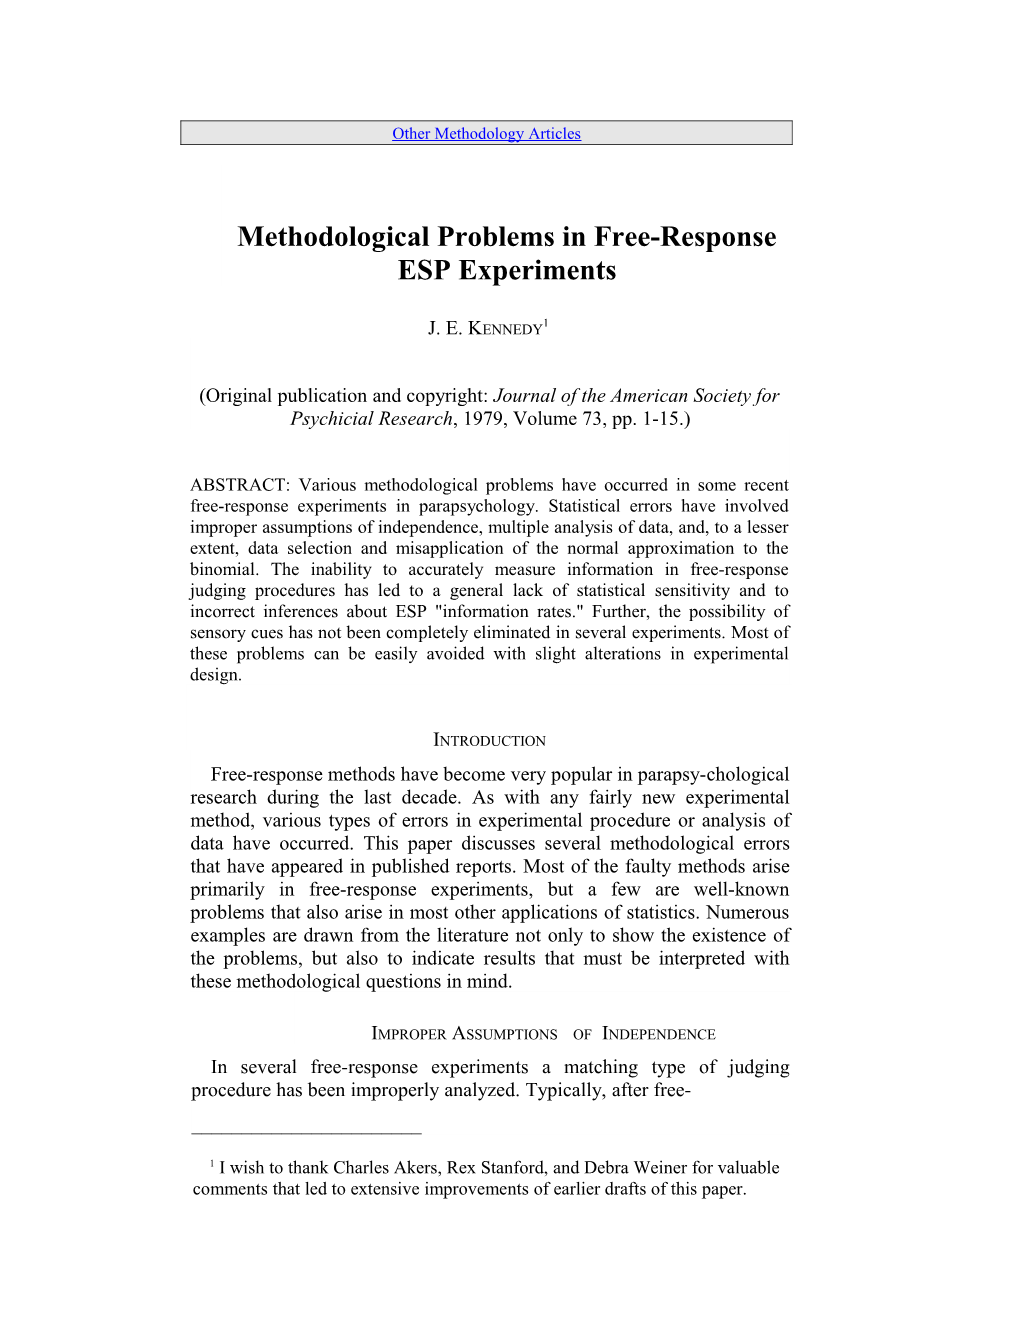 Methodological Problems in Free-Response ESP Experiments